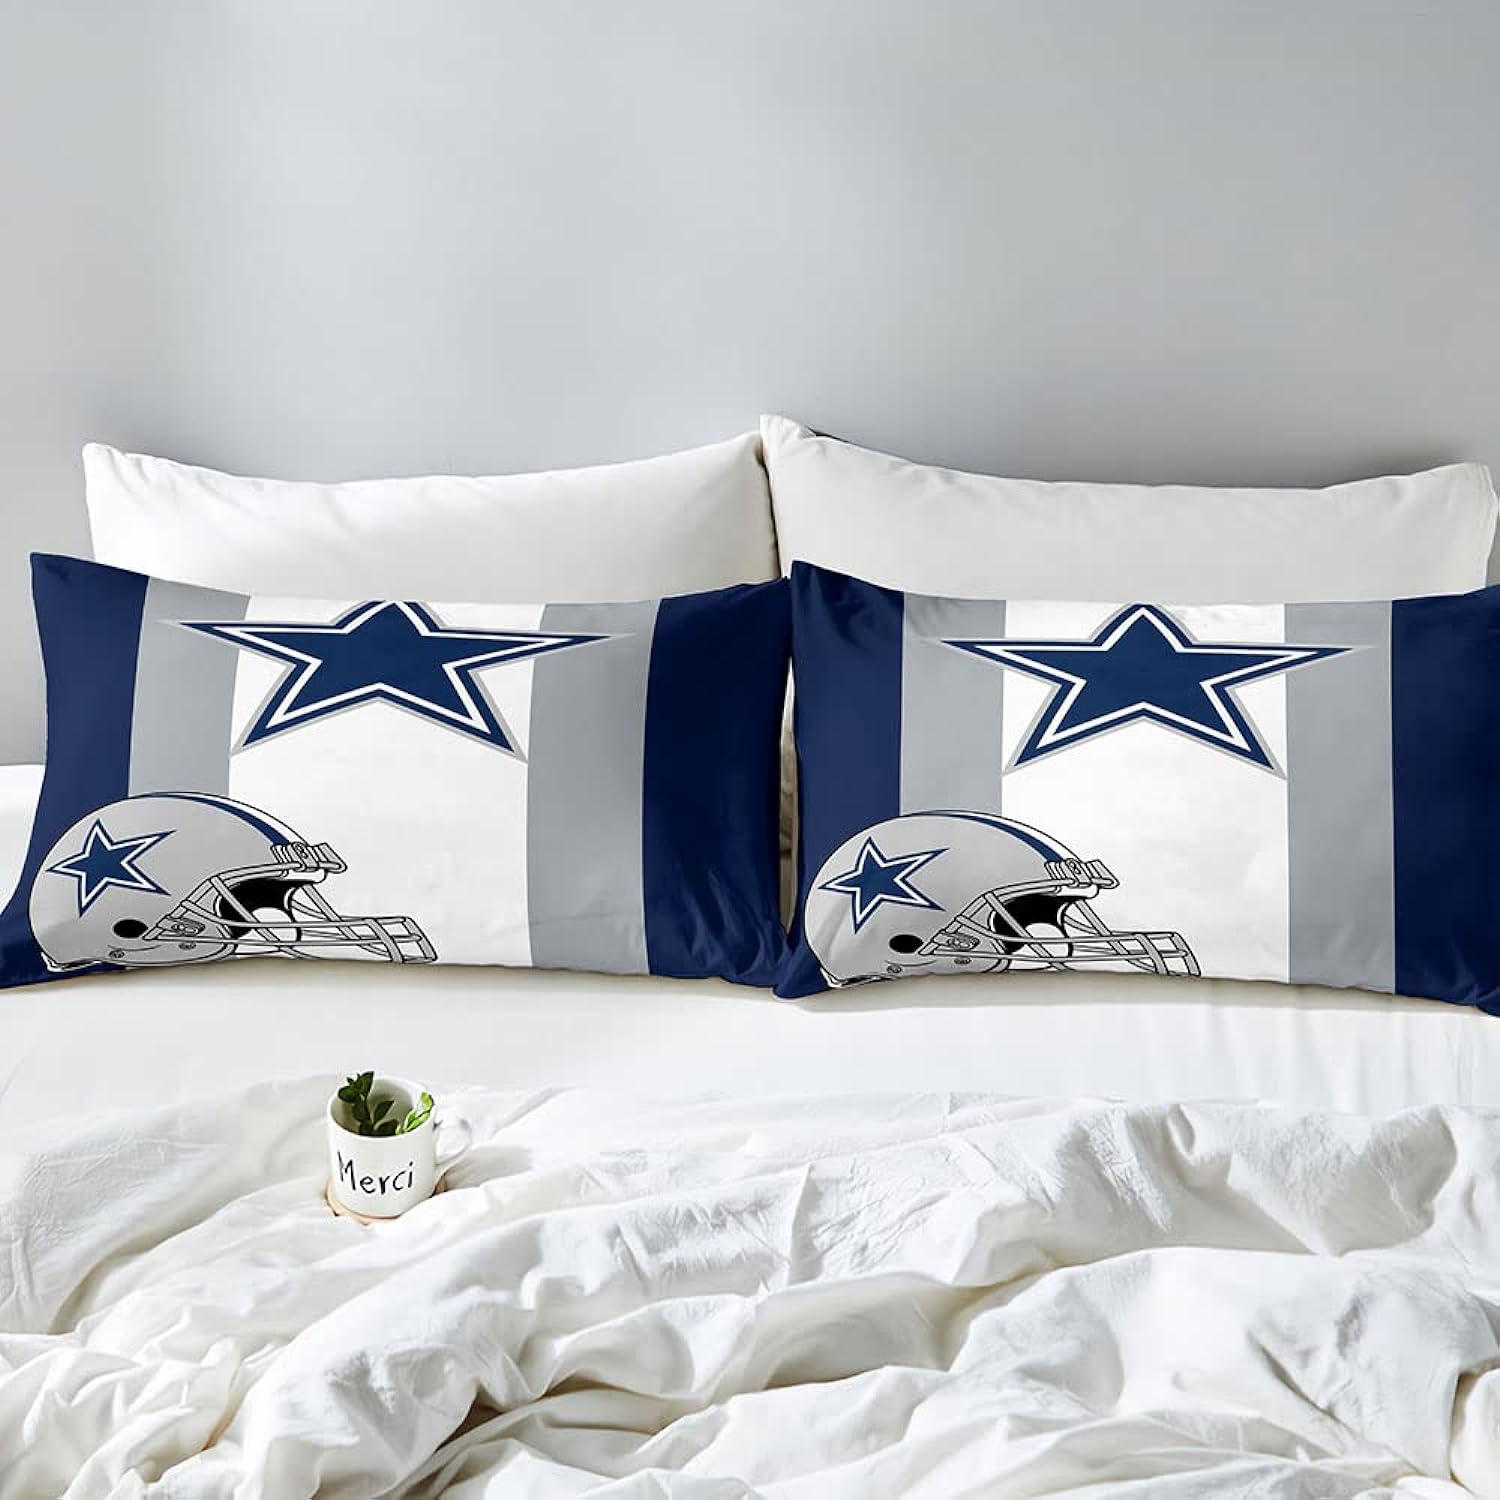 Great Choice Products Vivihome 2Pcs American Football Duvet Cover Set, Twin Bedding Sets, Sports Bedding, Grey White Navy Blue Striped Comforter Co…